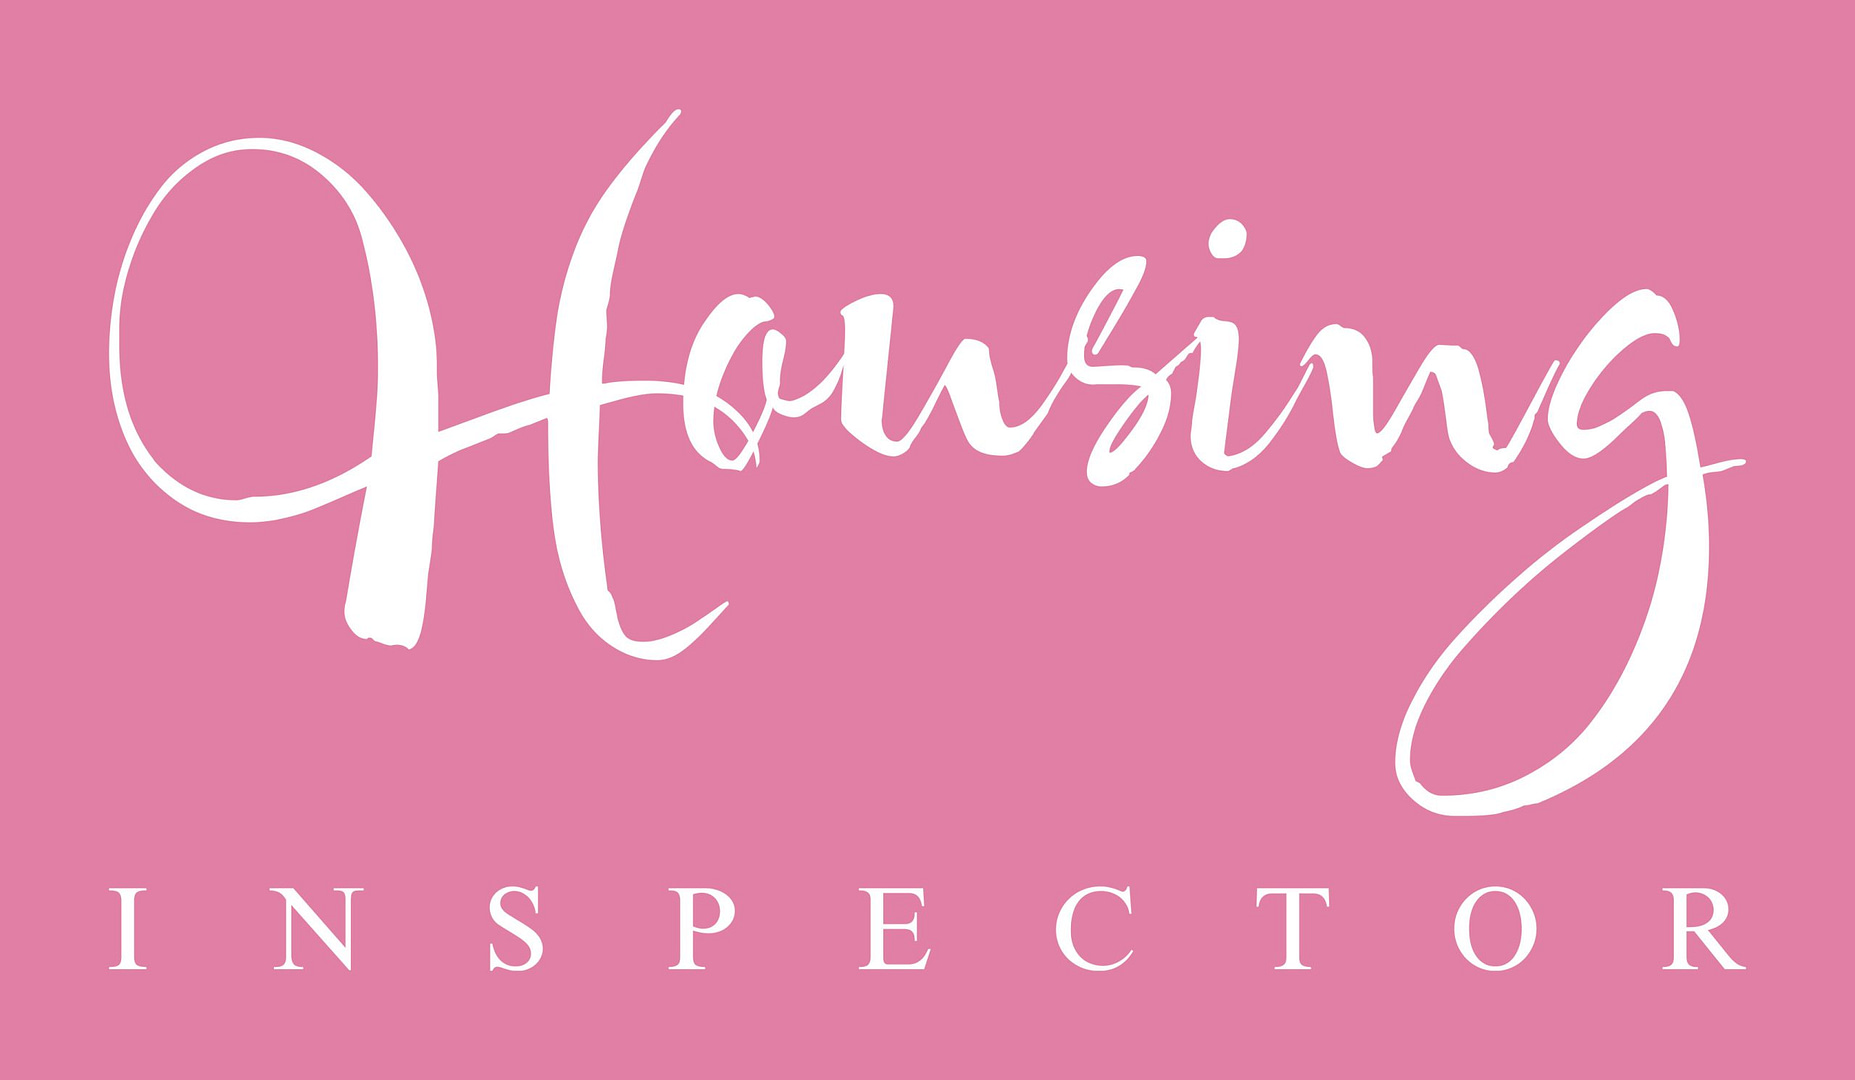 Words "Housing Inspector" in white on pink background